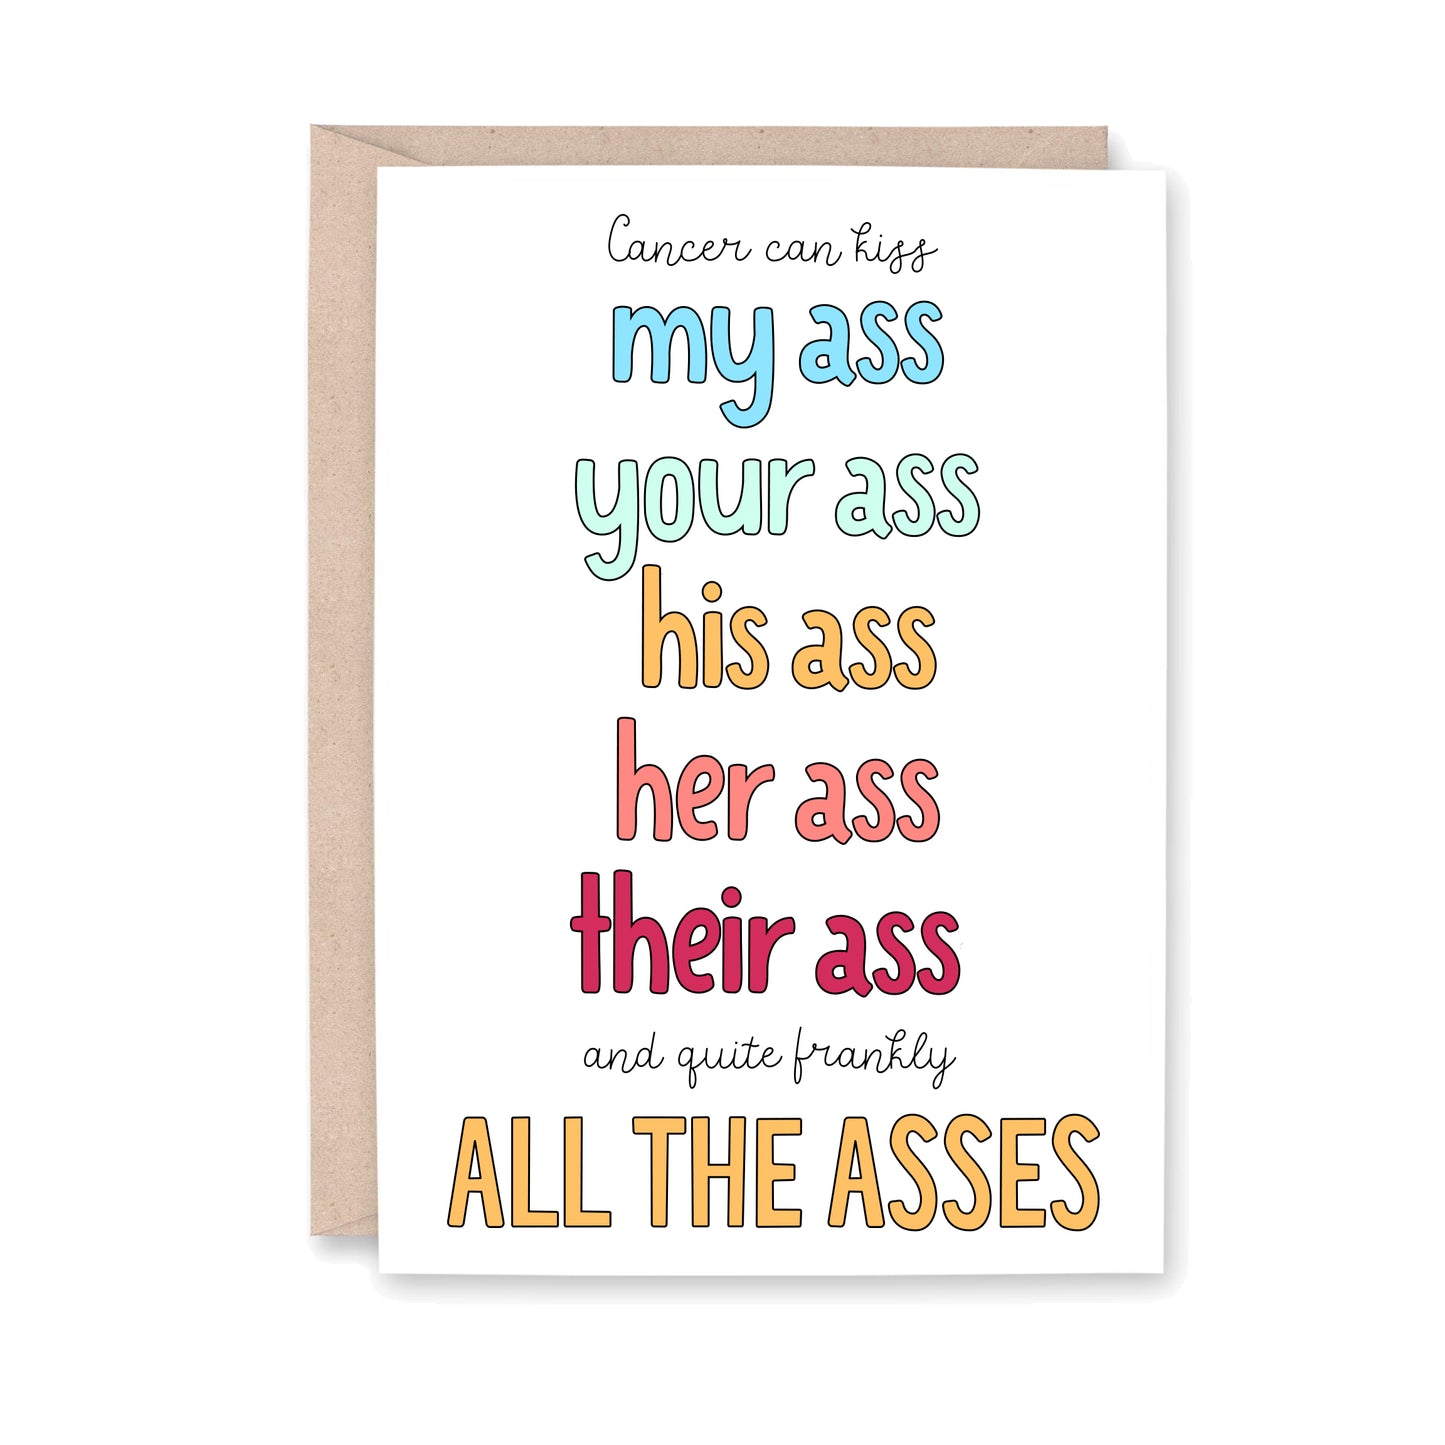 Greeting card that says, Cancer can kiss my ass your ass his ass her ass their ass and quite frankly ALL THE ASSES